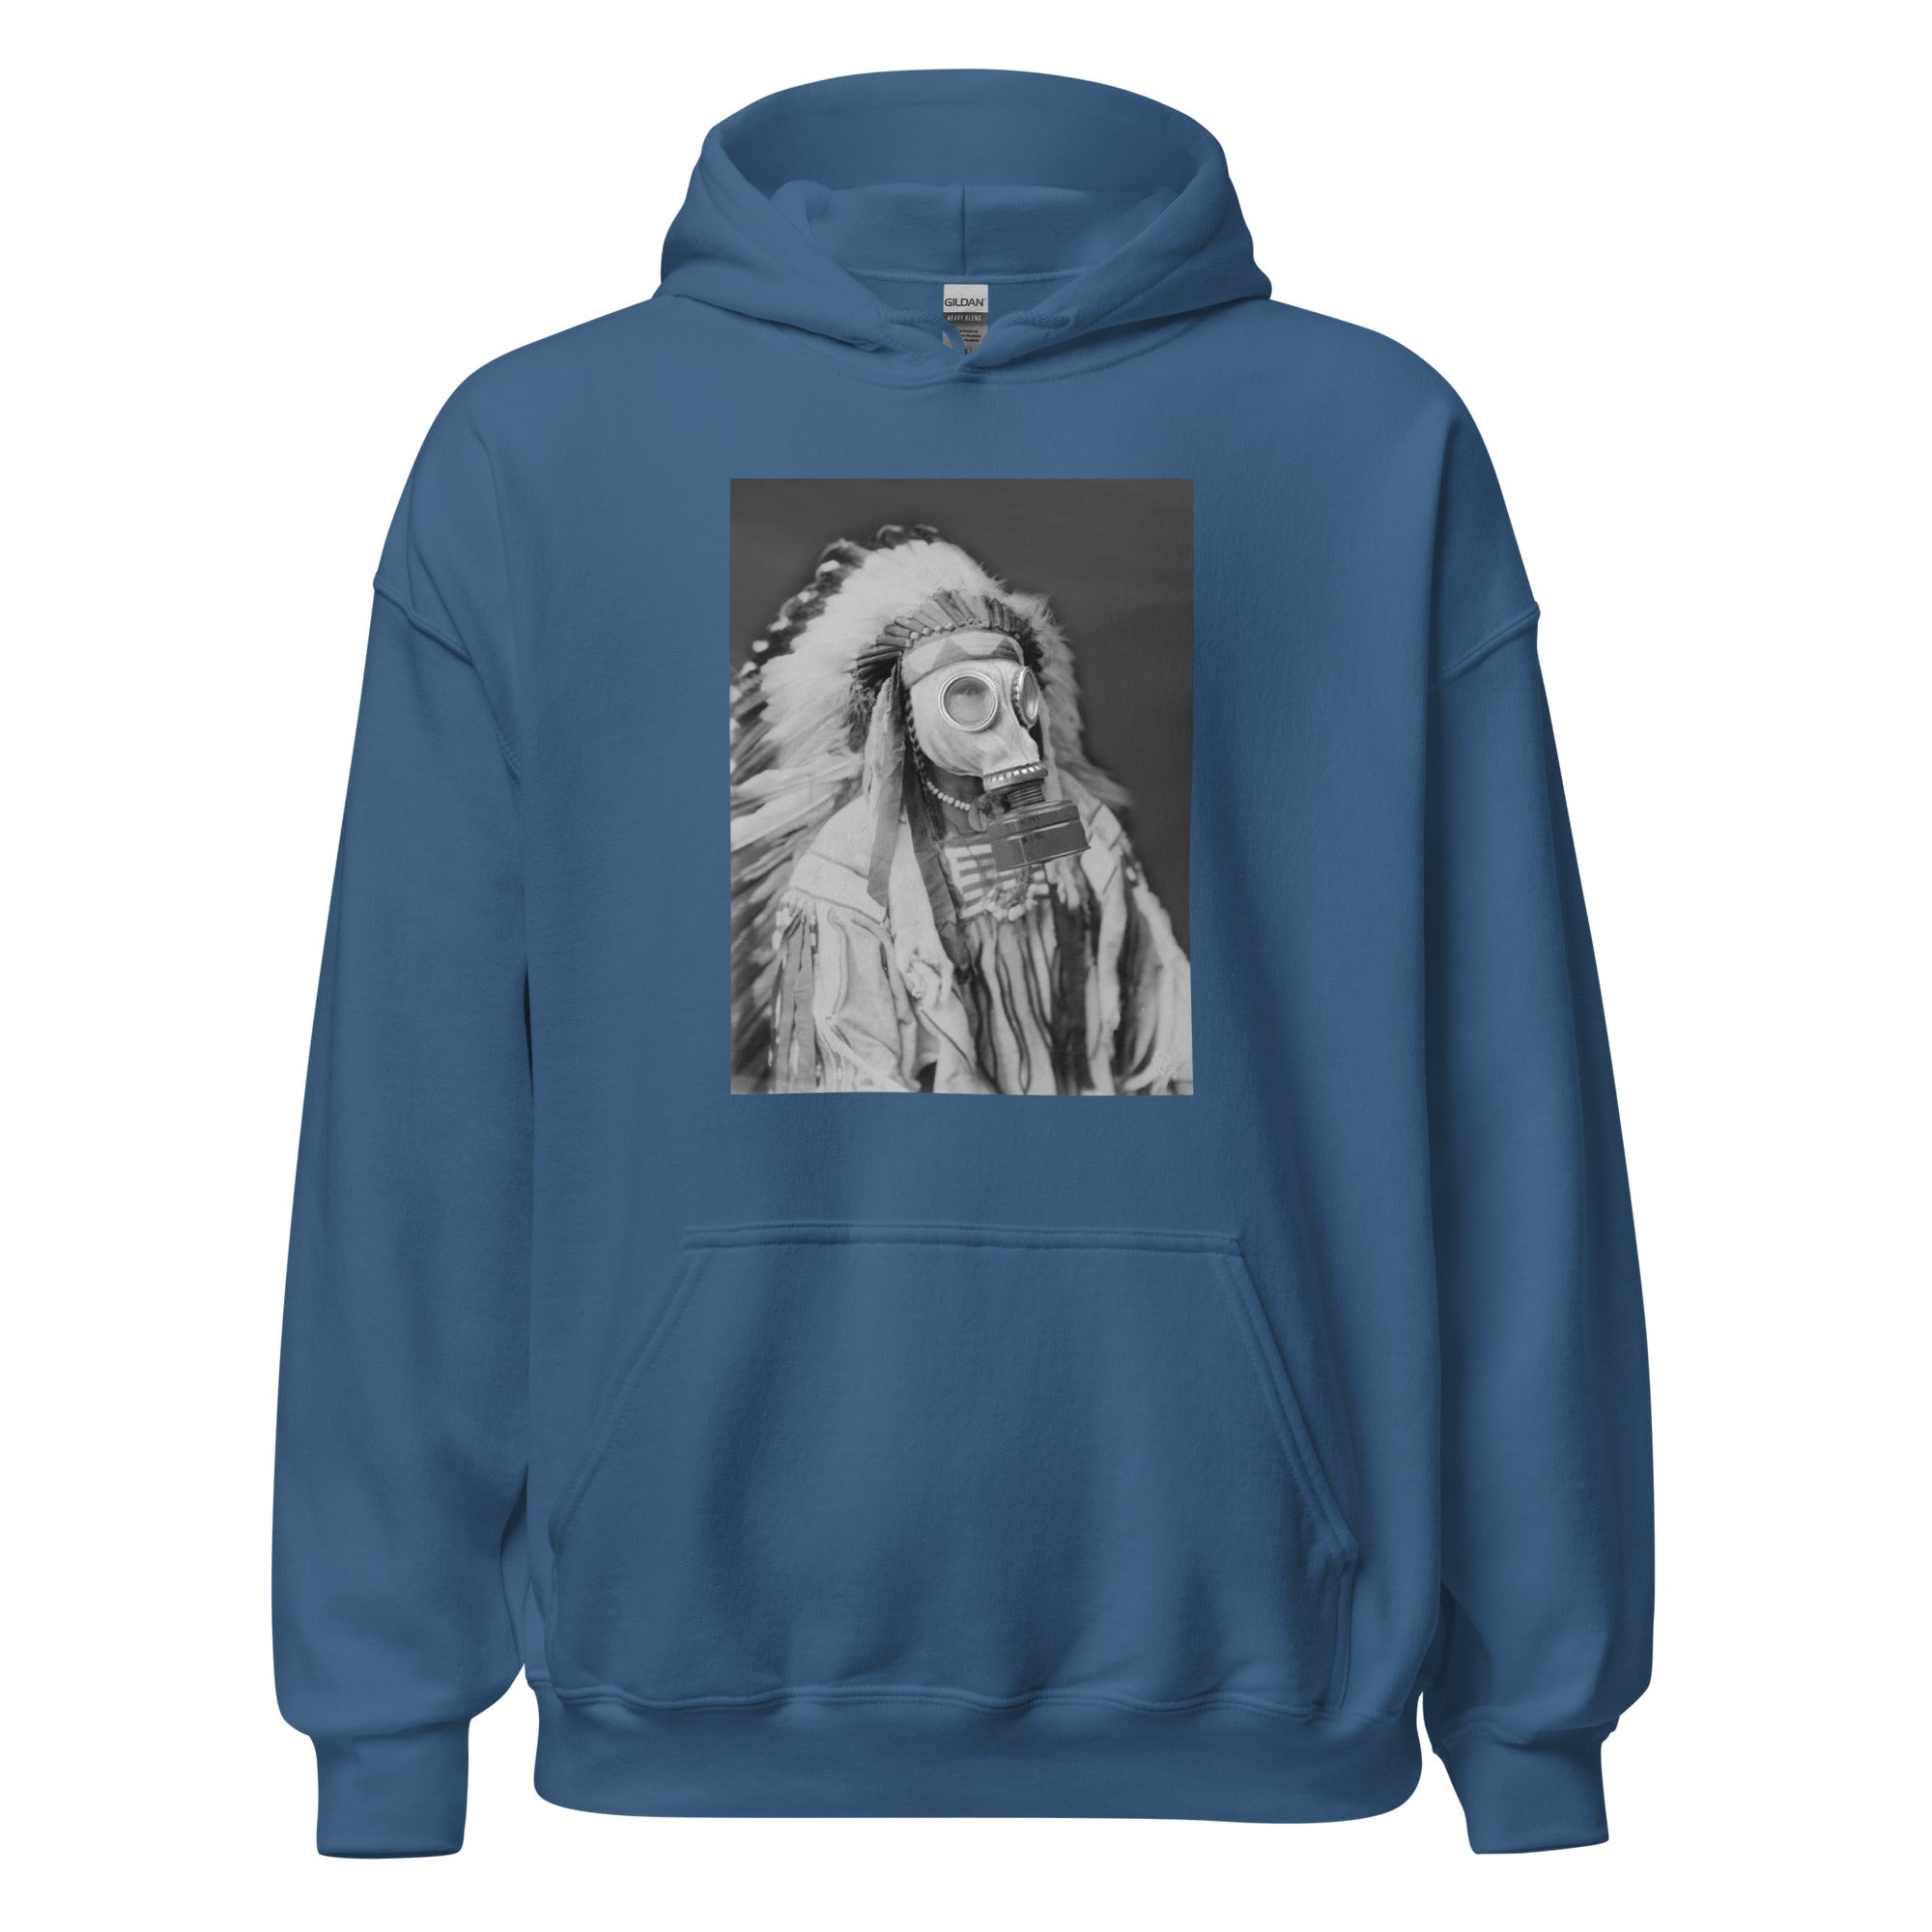 Protect Yourself Hoodie